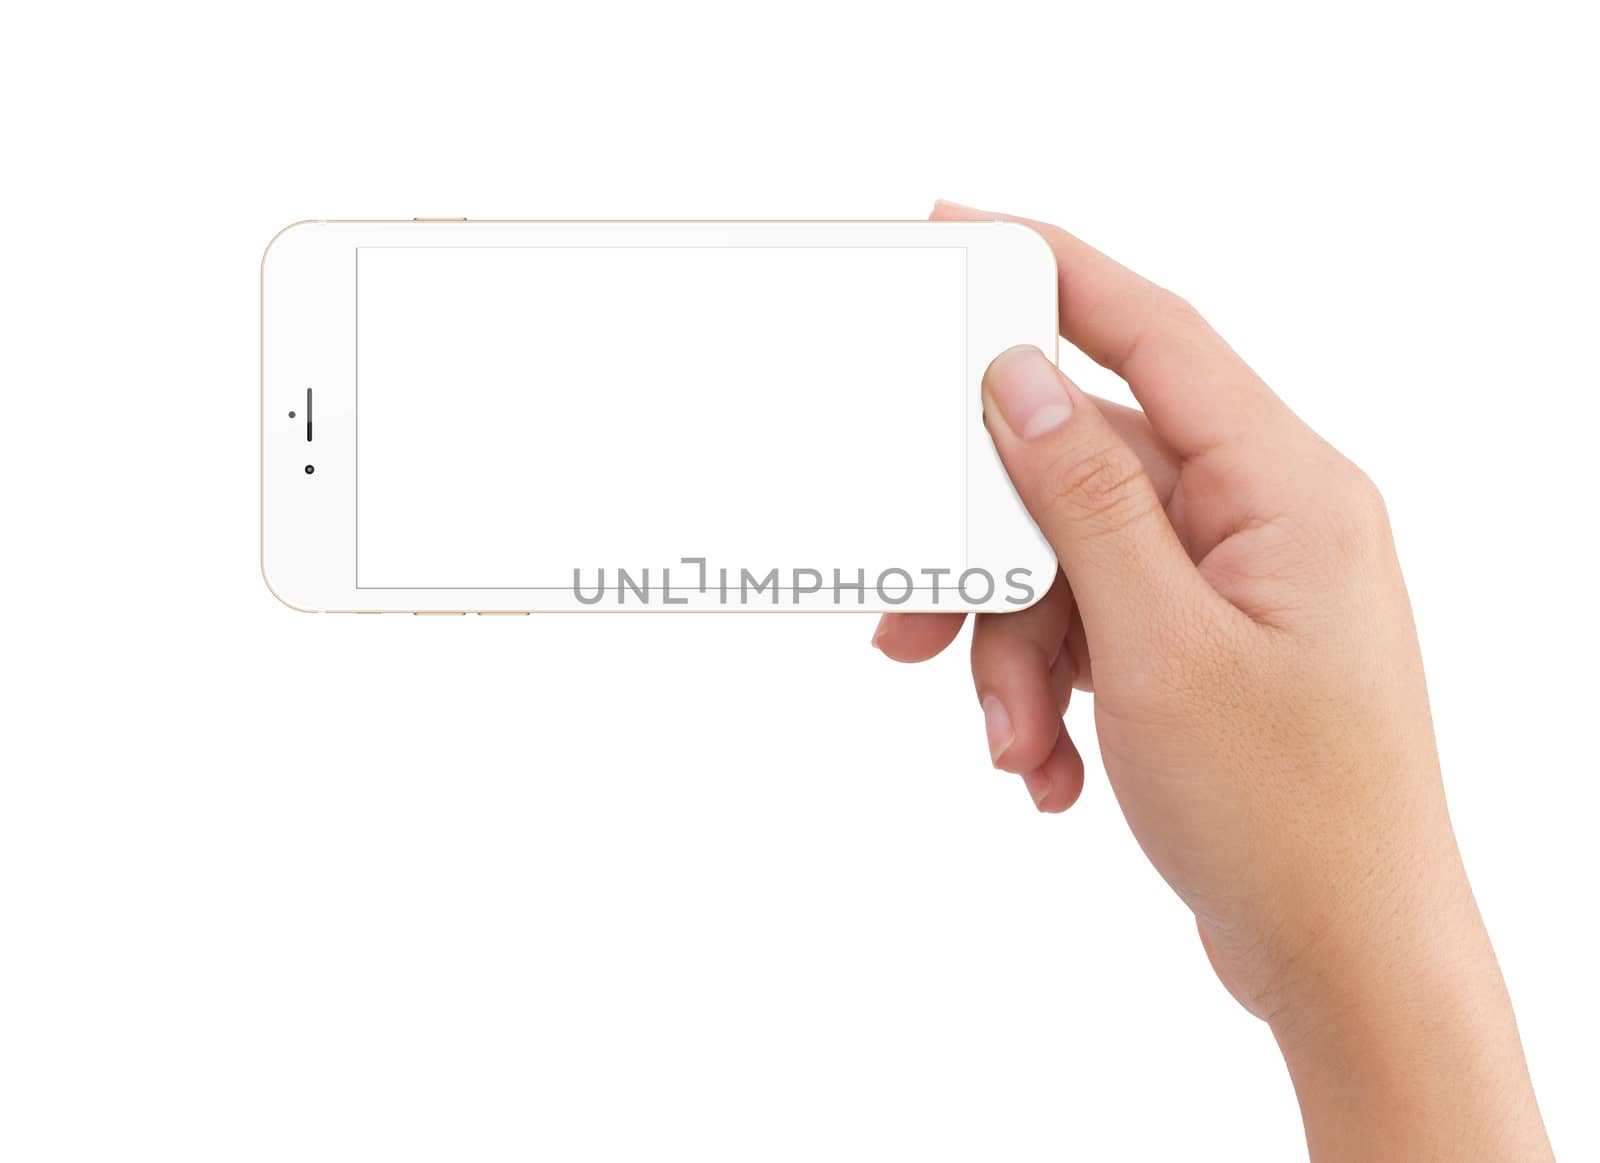 Isolated human right hand holding white mobile phone by cougarsan